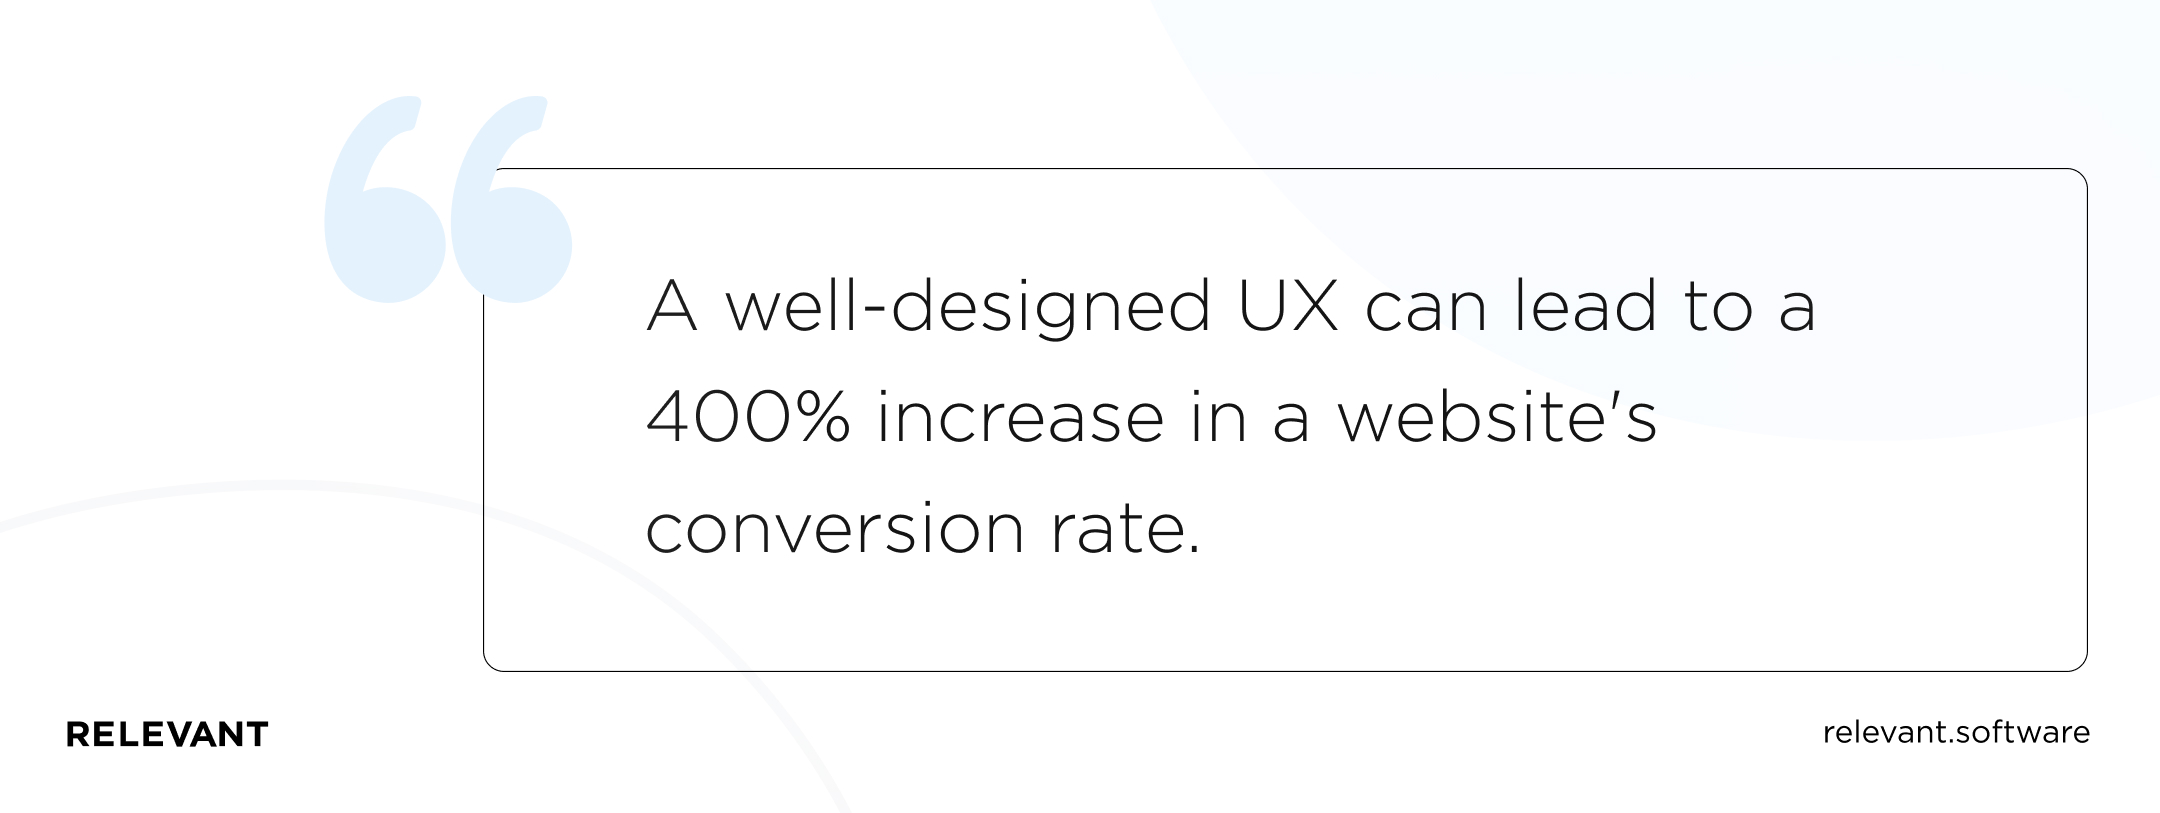 A well-designed UX can lead to a 400% increase in a website's conversion rate.